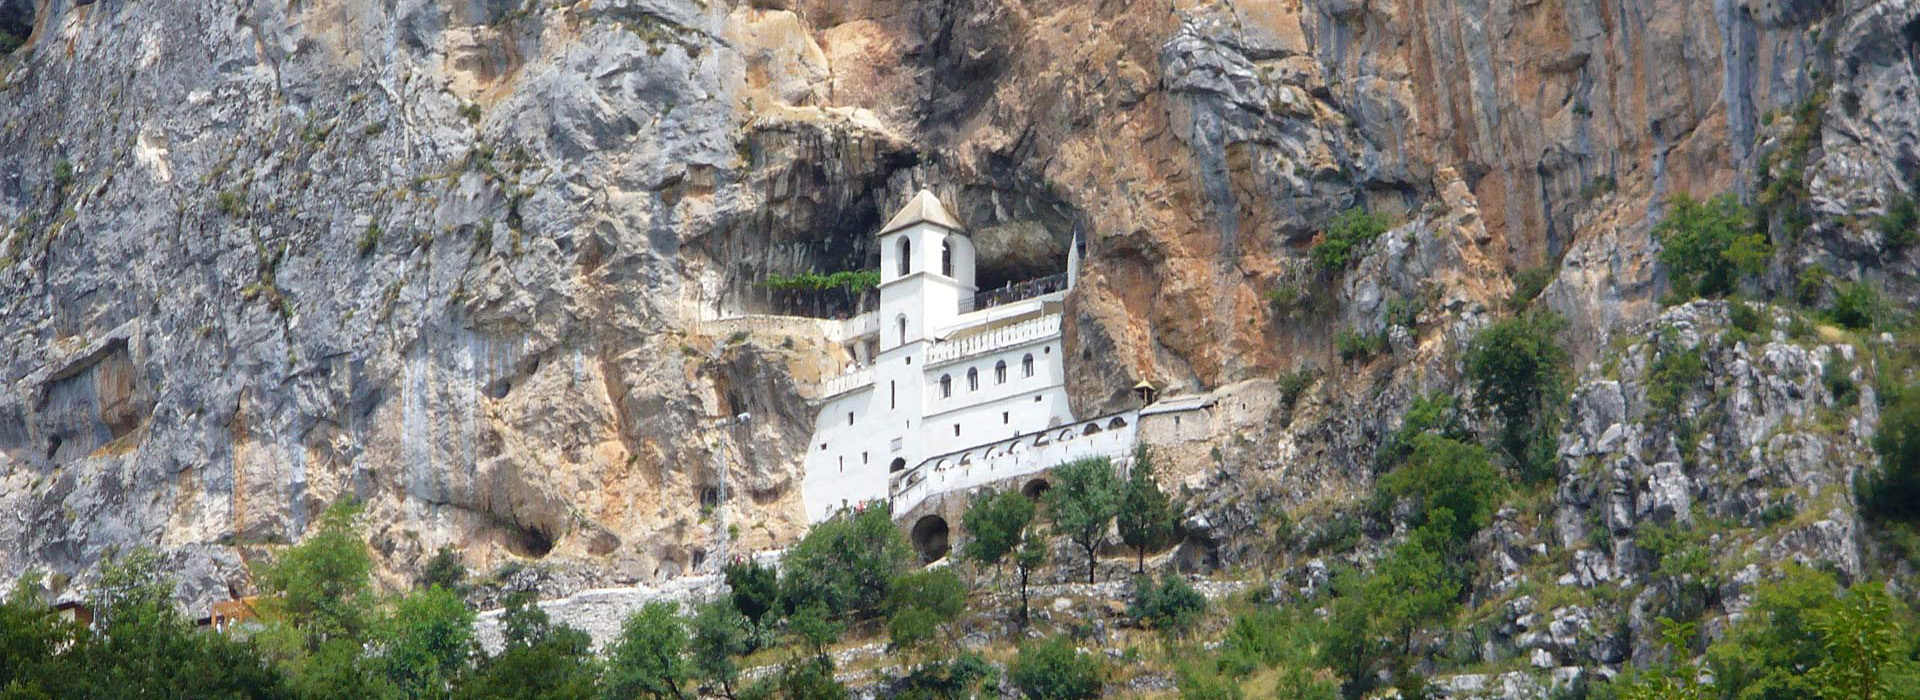 Montenegro walking guided holiday - Ostrog monastery